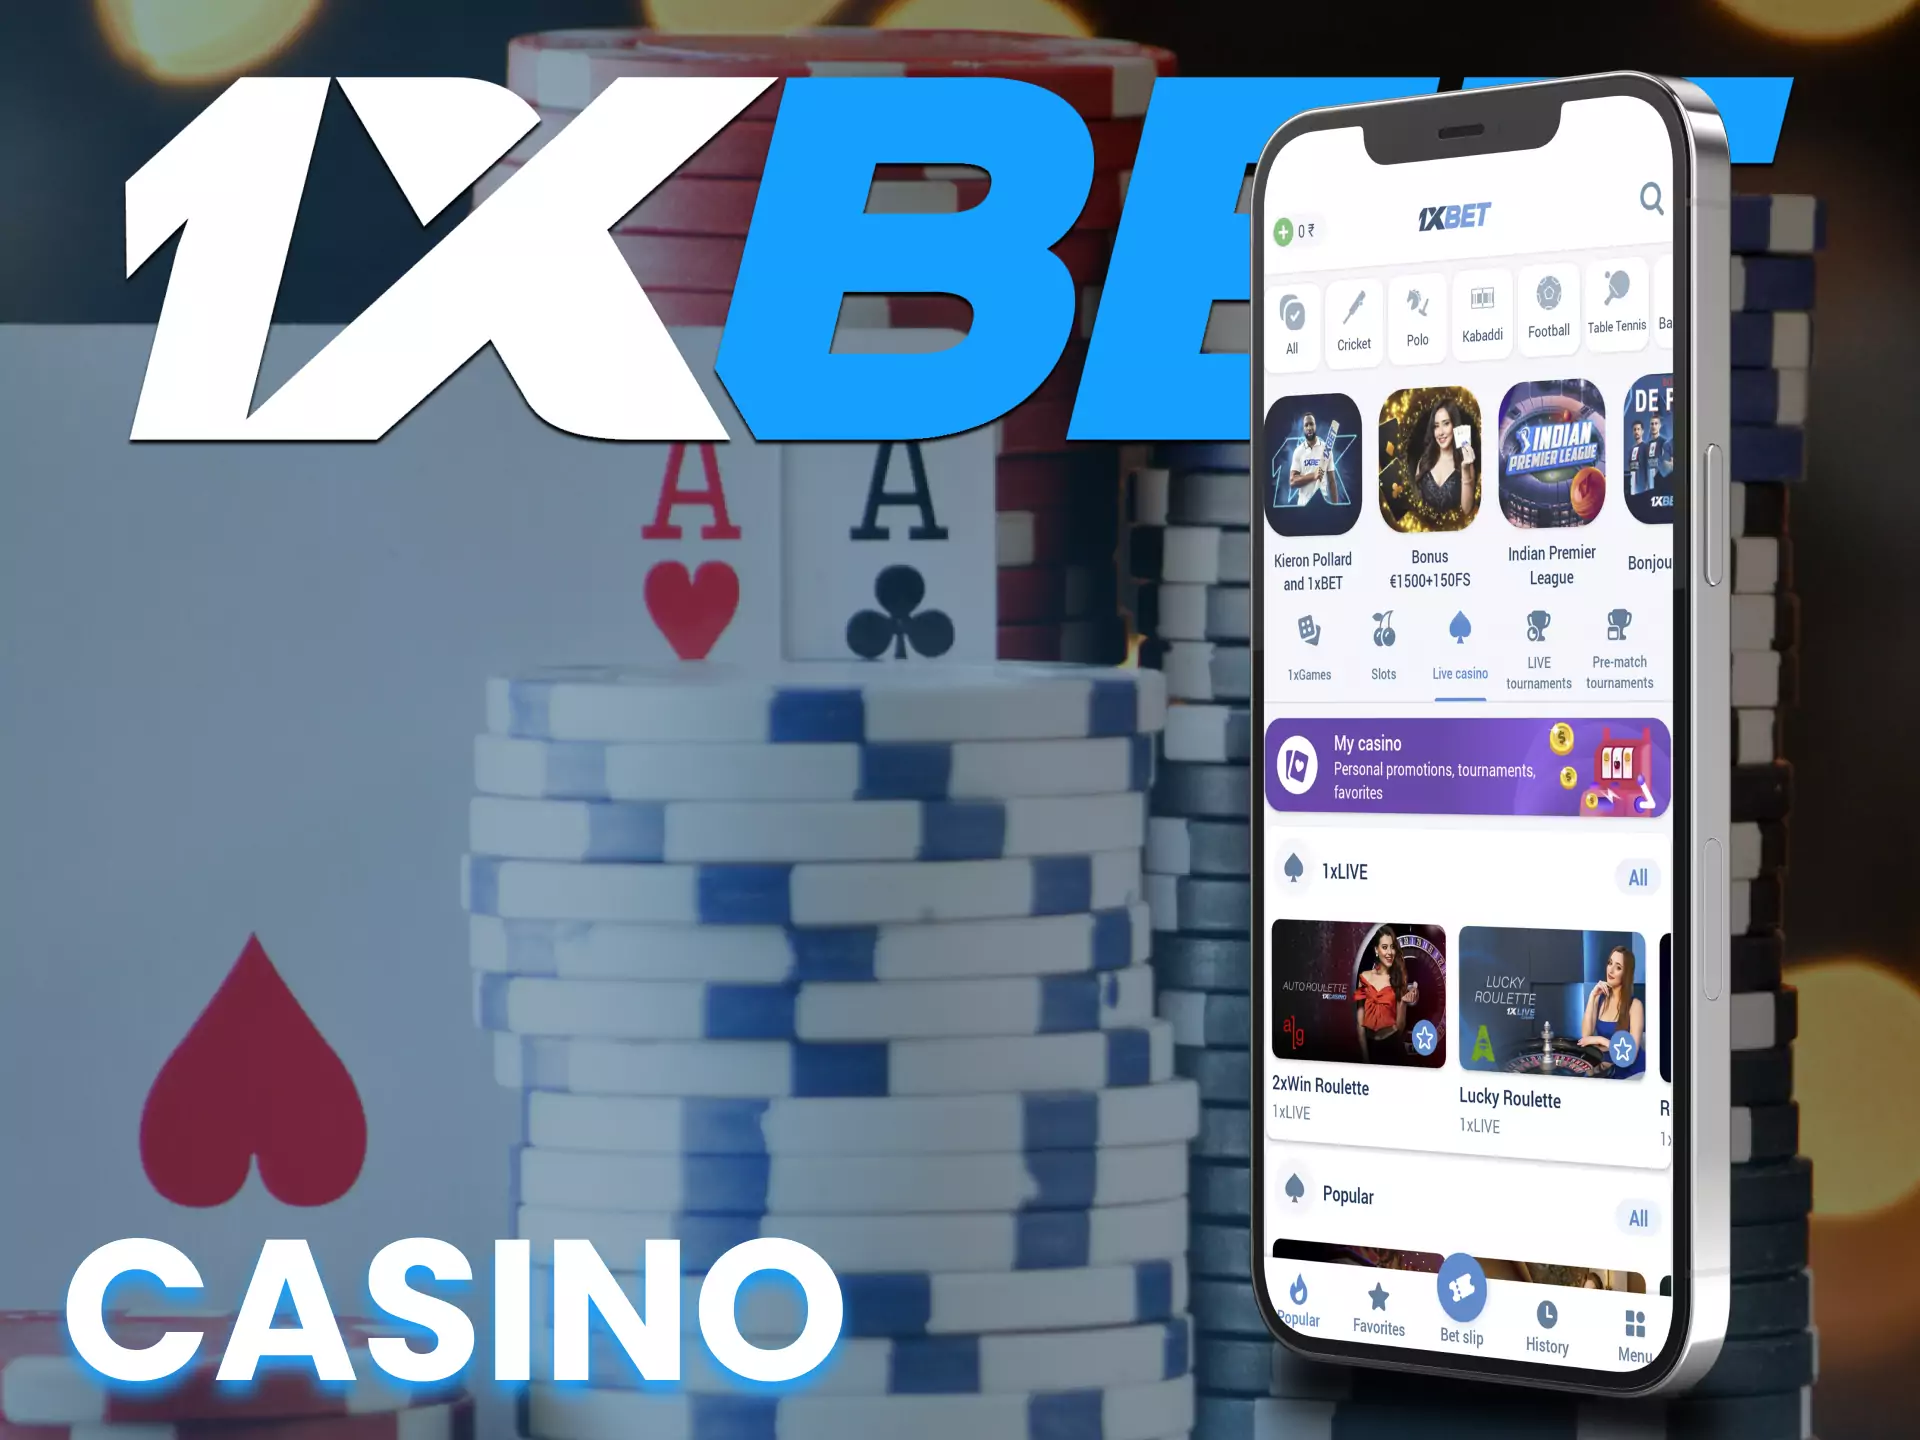 At 1xBet be sure to visit the casino section.